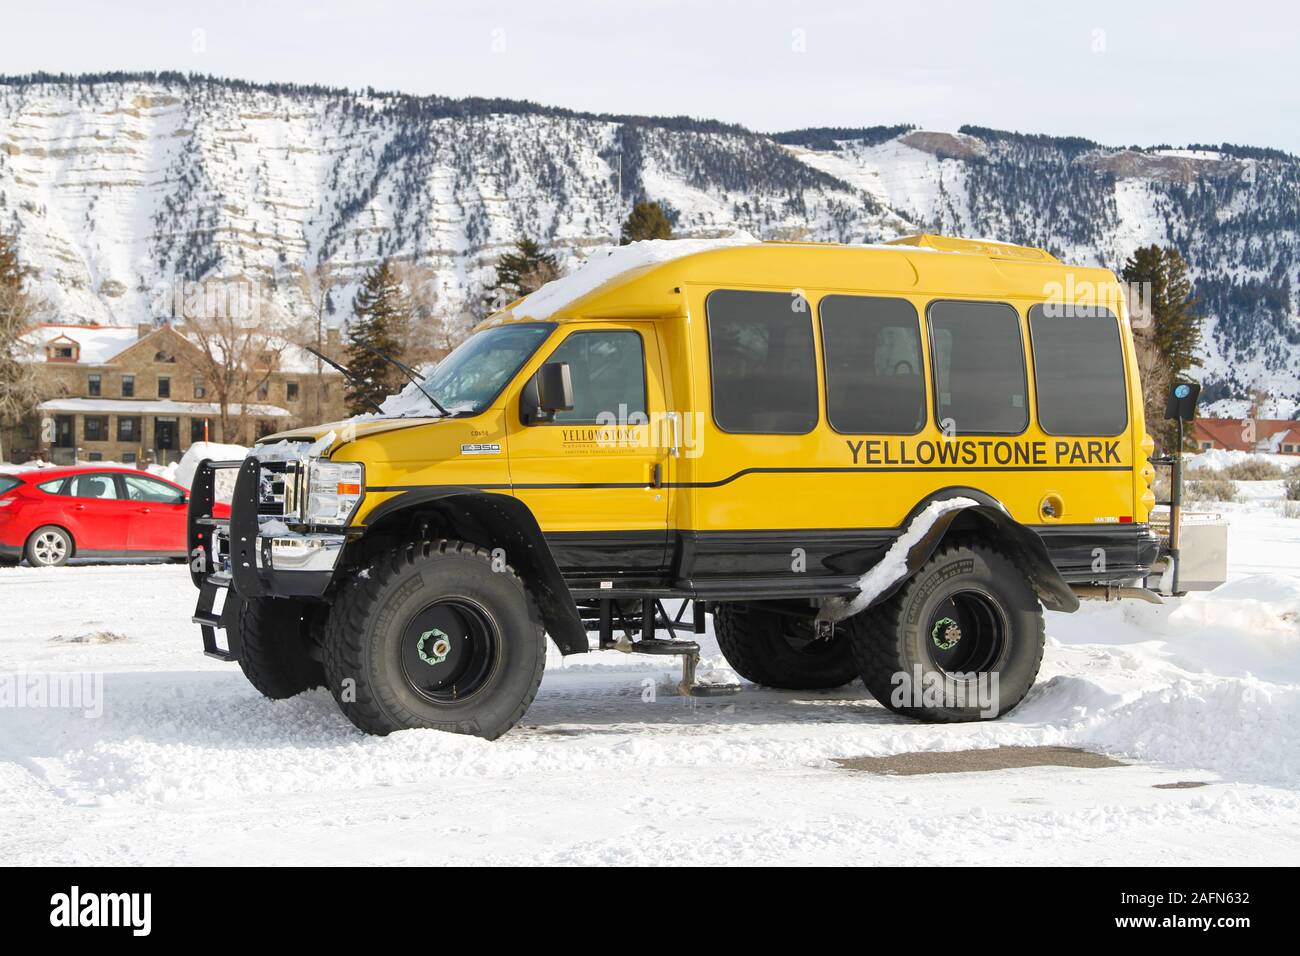 https://c8.alamy.com/comp/2AFN632/yellowstone-national-park-xanterra-snowcoach-with-wheels-parked-in-mammoth-hot-springs-yellowstone-national-park-wyoming-usa-2AFN632.jpg